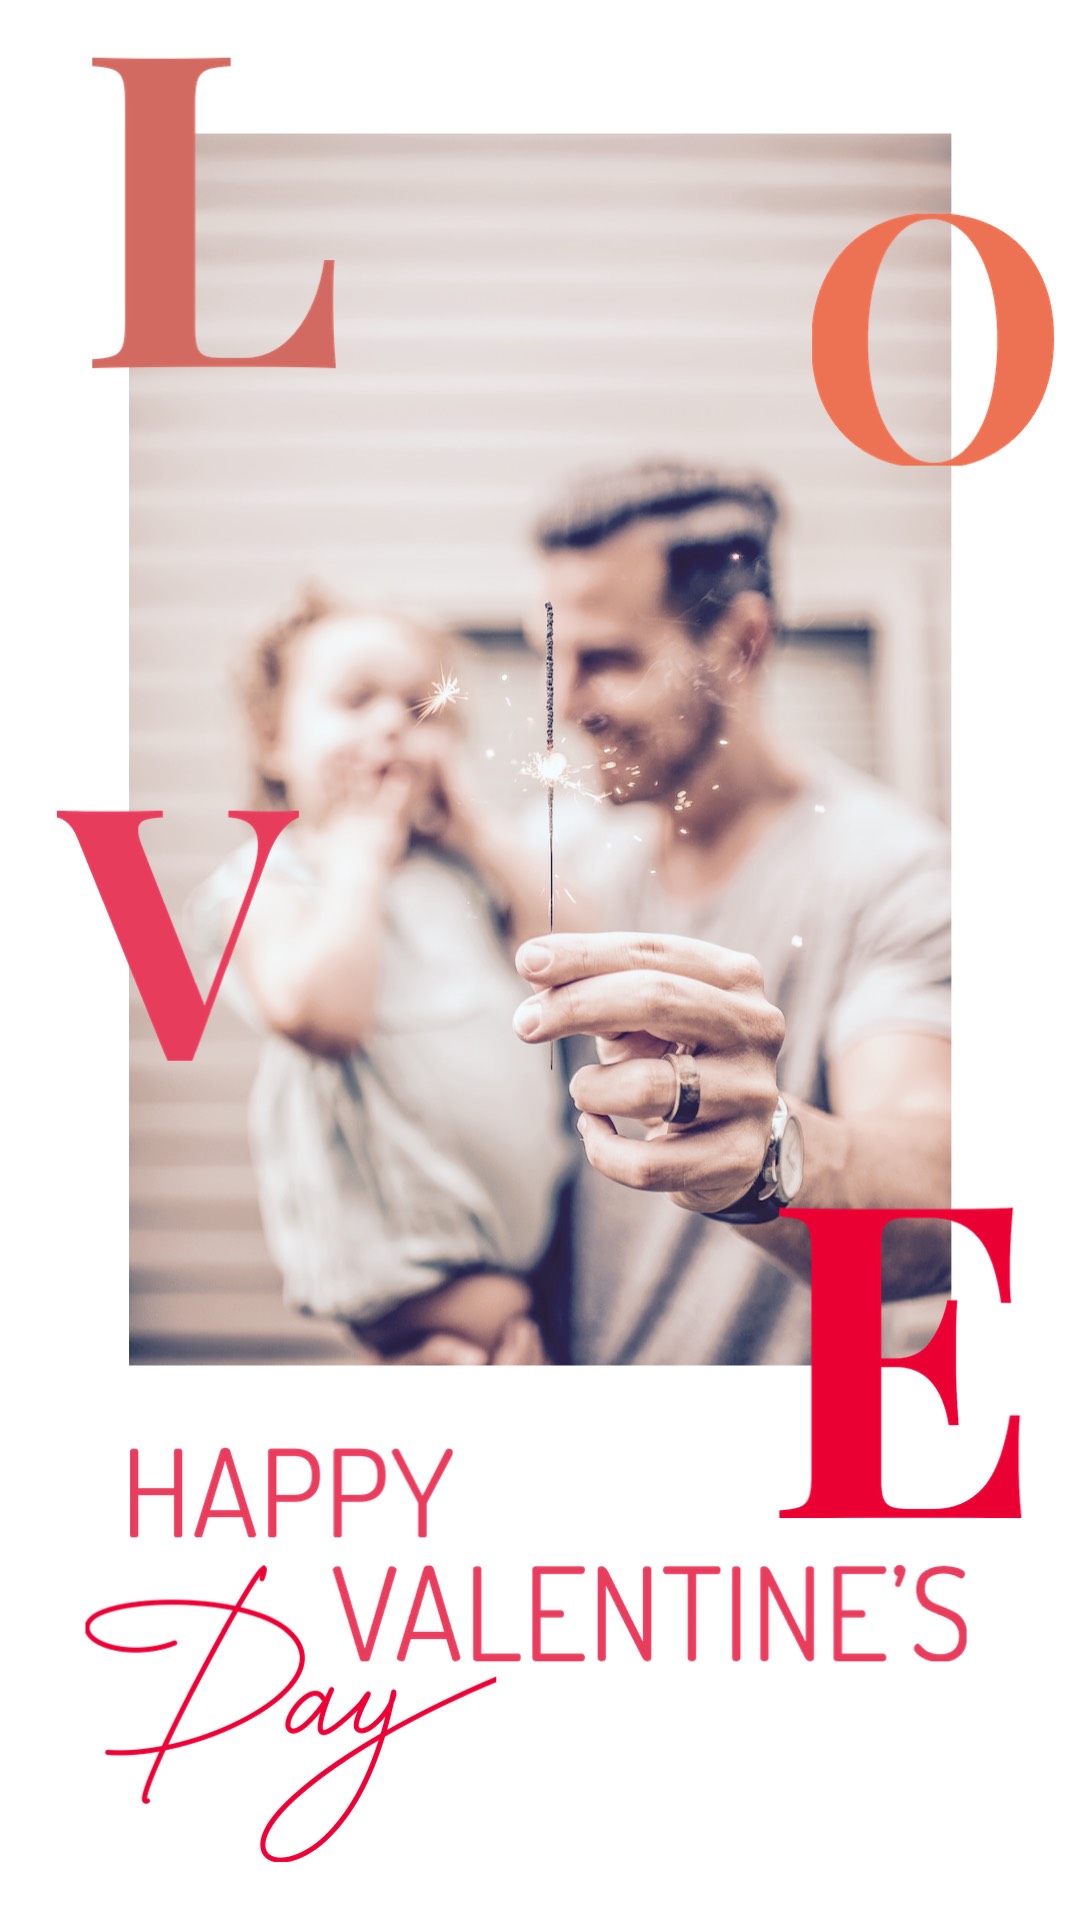 Dad holding his baby happy valentine's day love story template